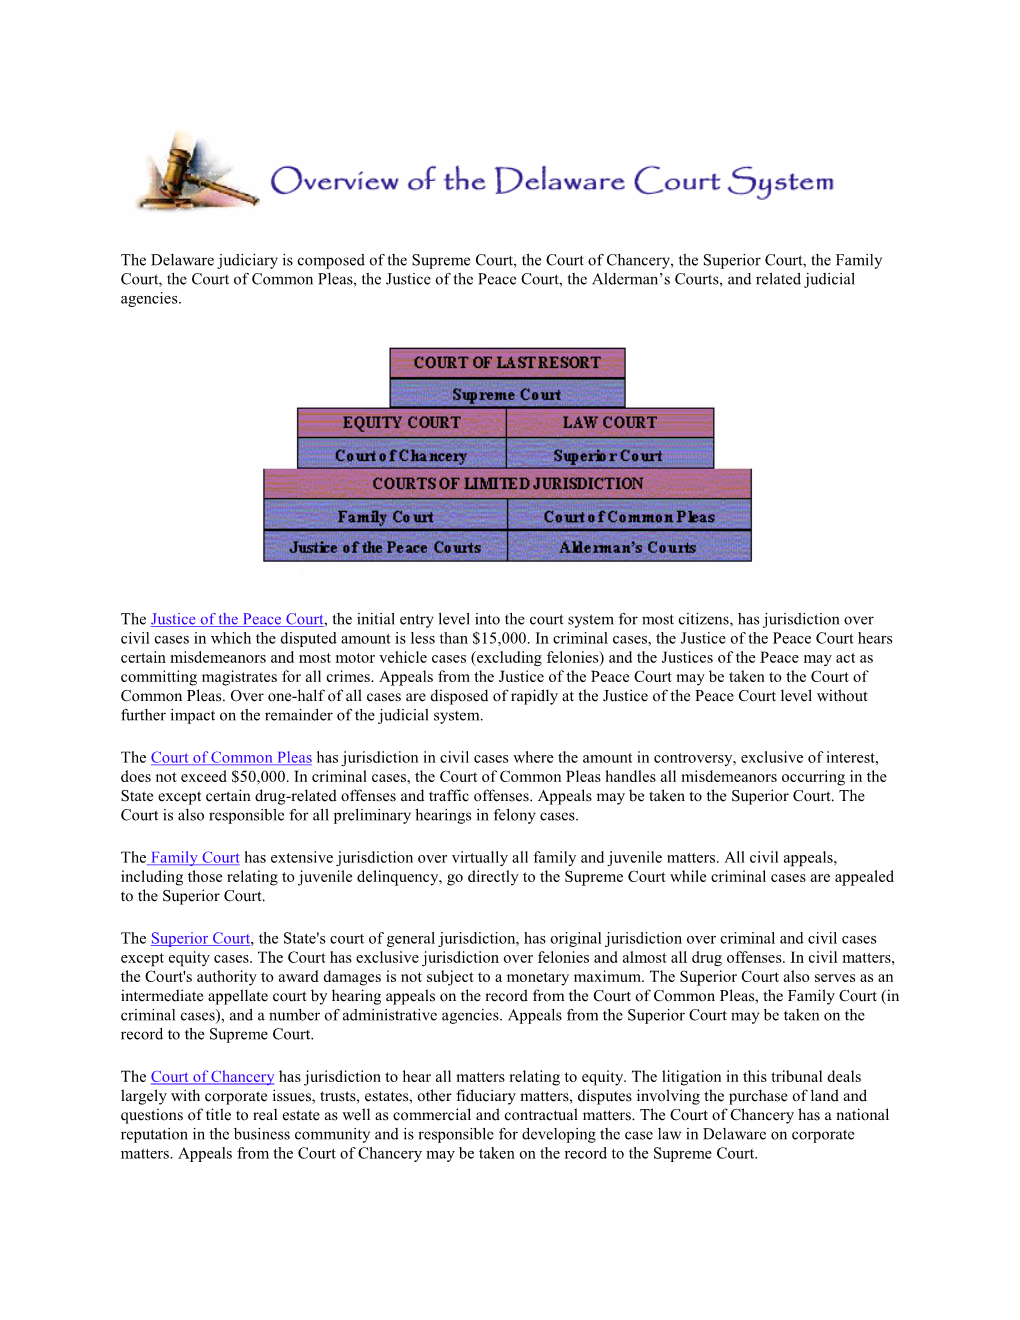 Overview of Delaware Court System.Pdf